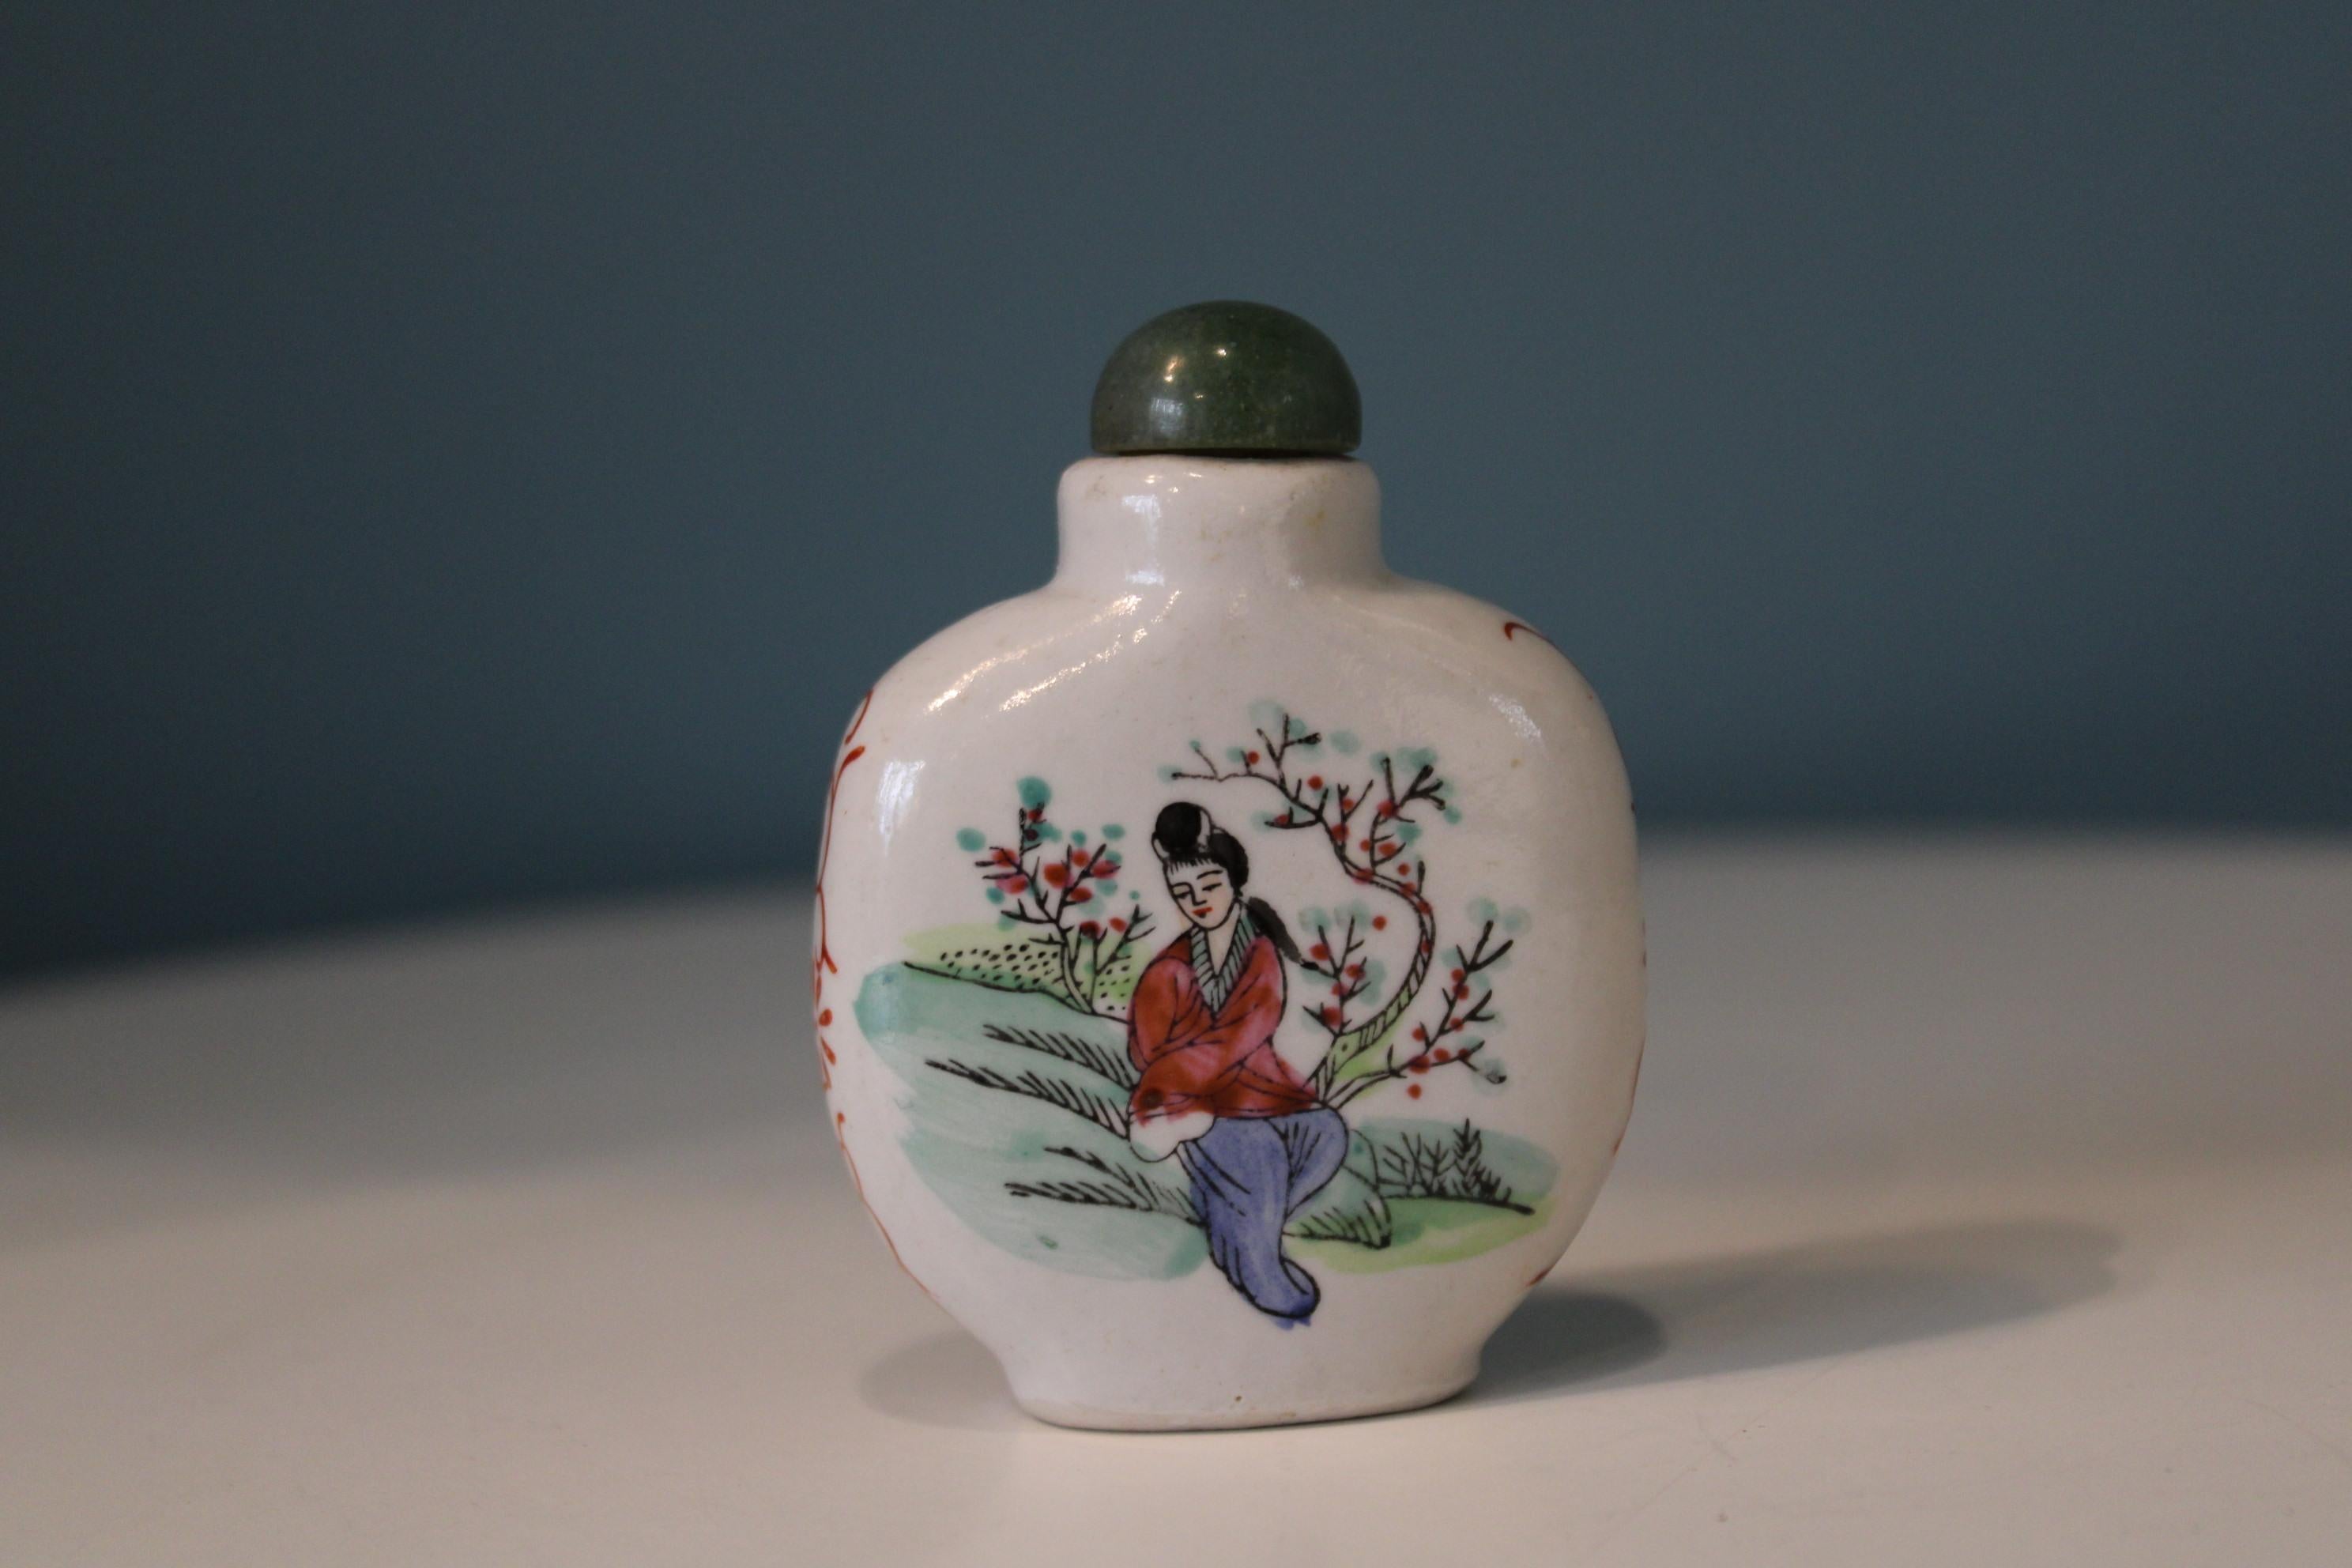 Porcelain Chinese snuff bottle.